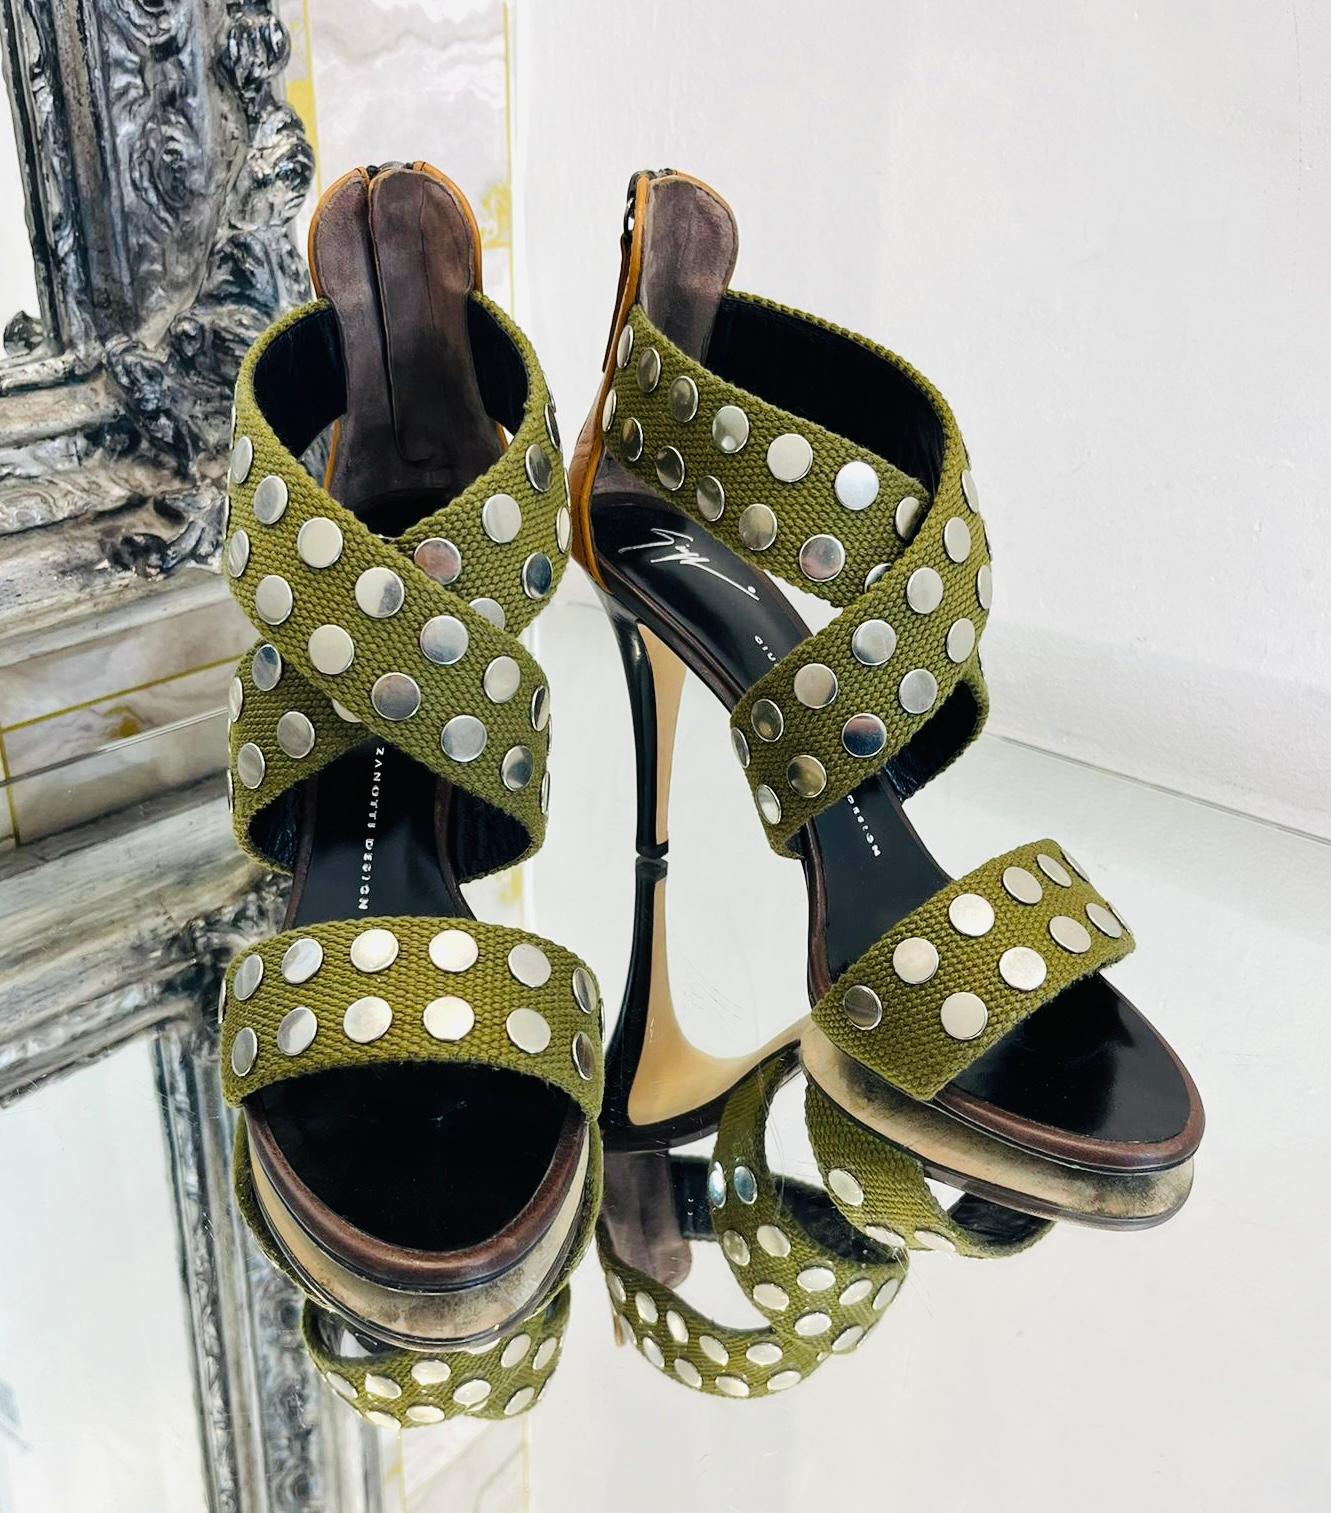 Giuseppe Zanotti Studded Sandals In Excellent Condition For Sale In London, GB